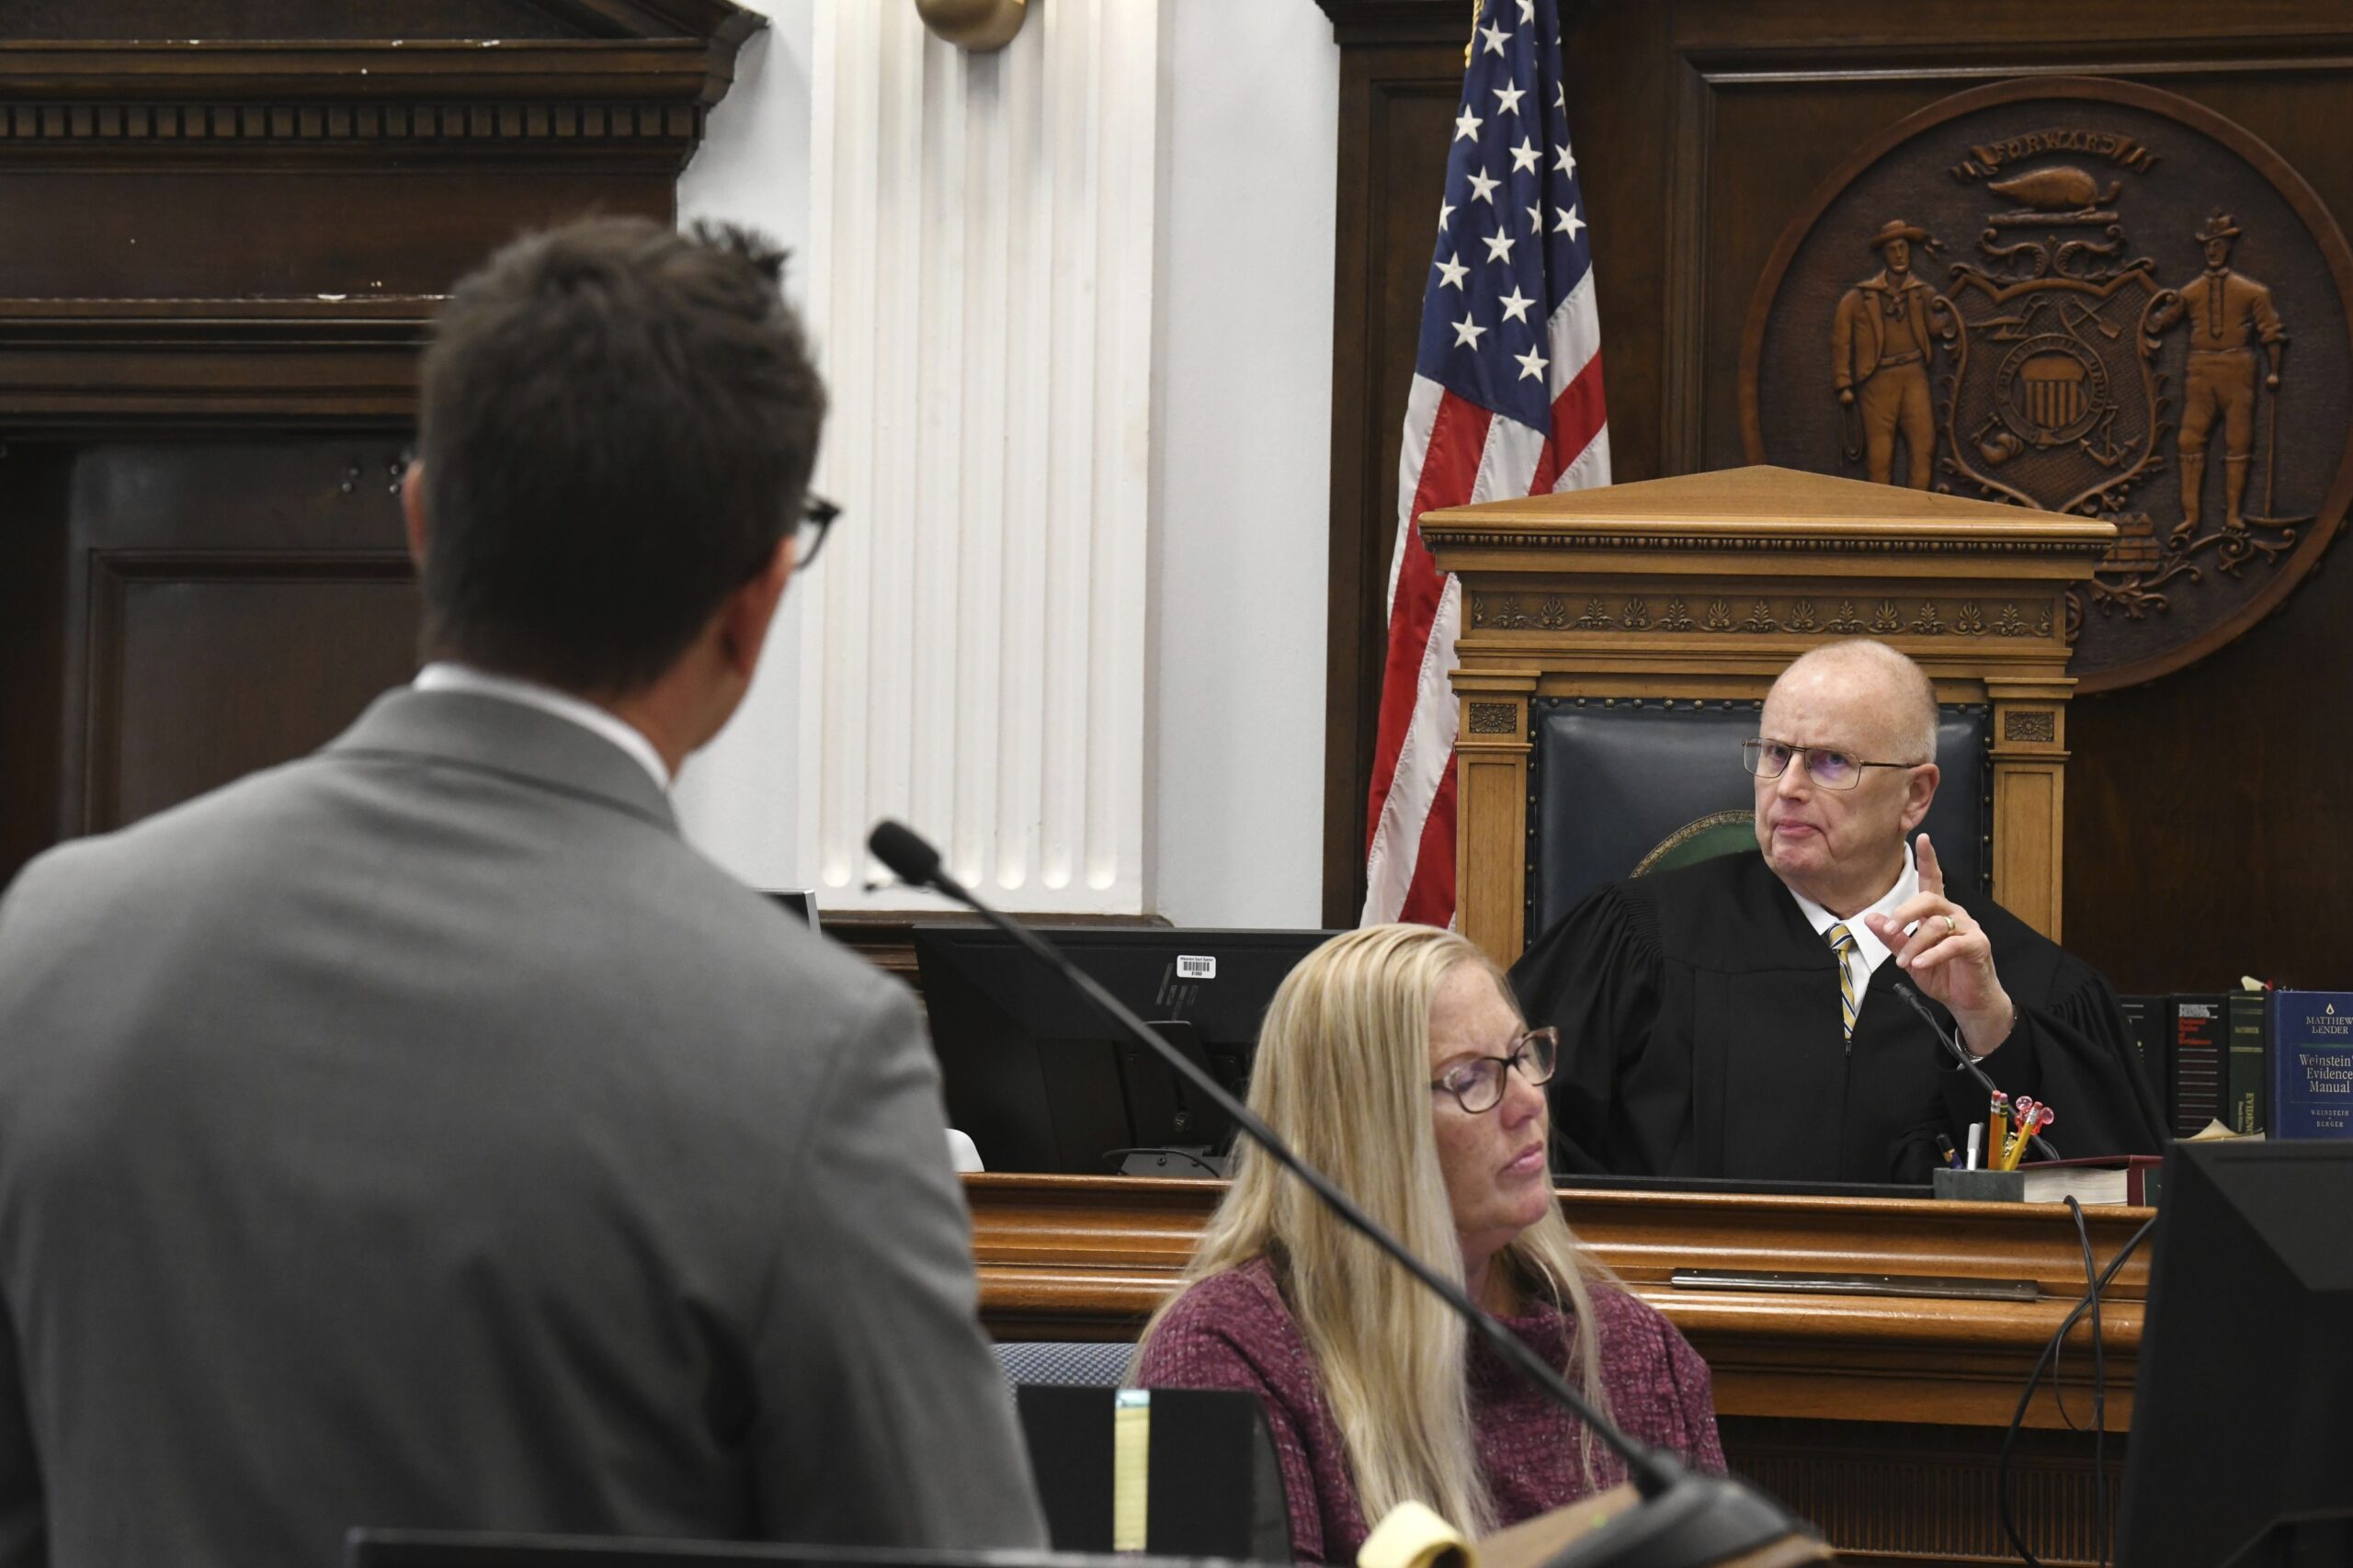 Assistant District Attorney Thomas Binger is admonished by Circuit Court Judge Bruce Schroeder